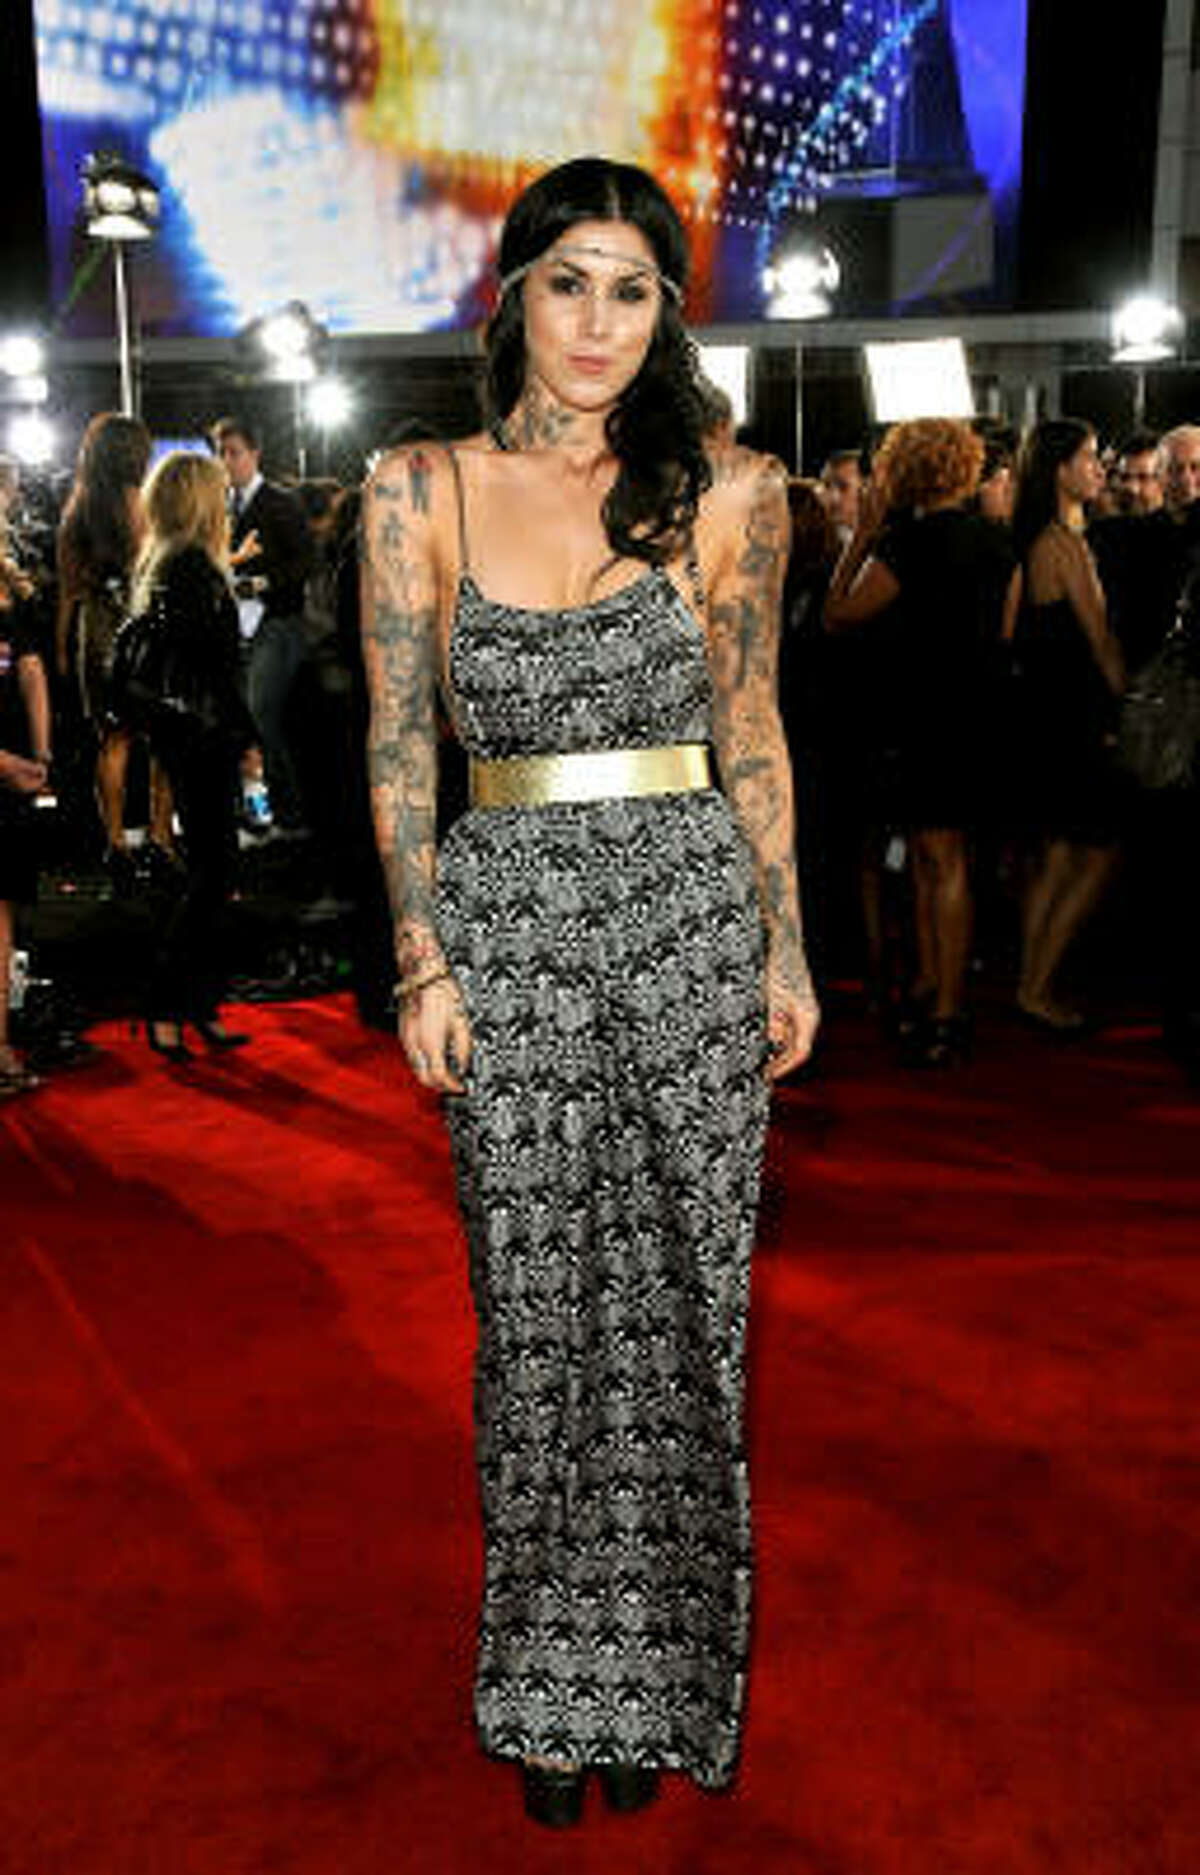 tattoo queen Kat Von has all covered